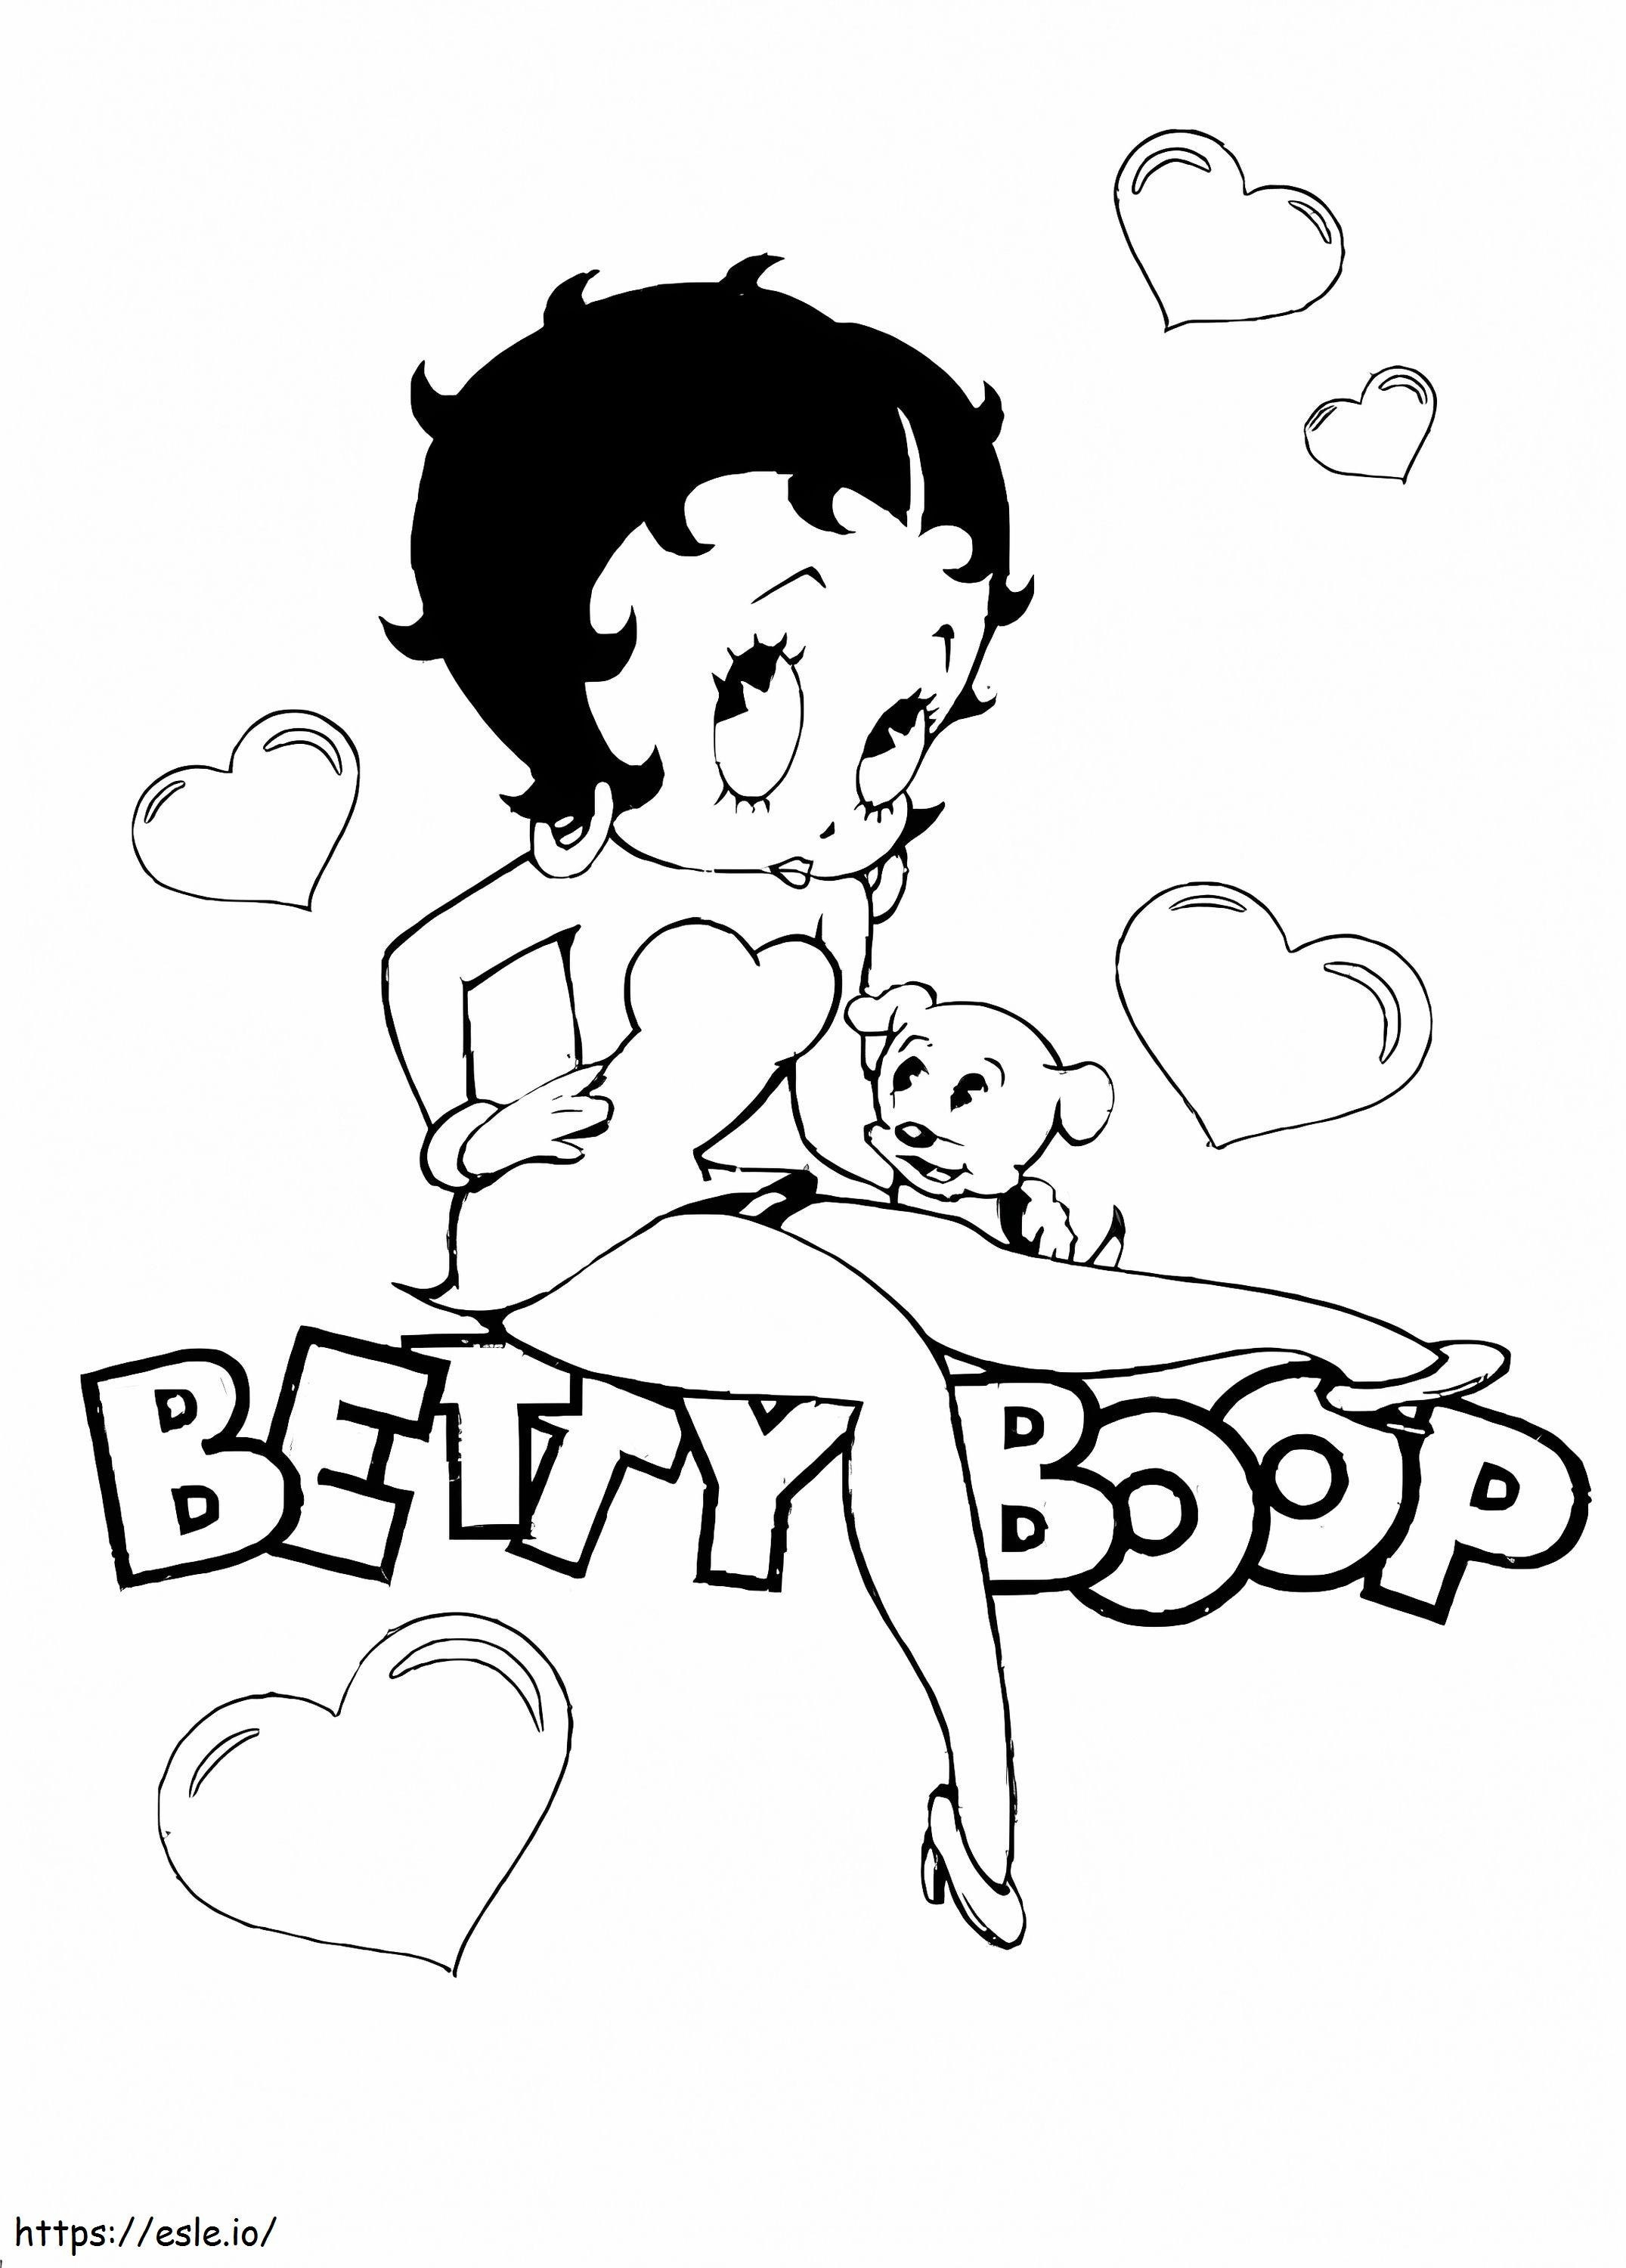 Betty Boop coloring page